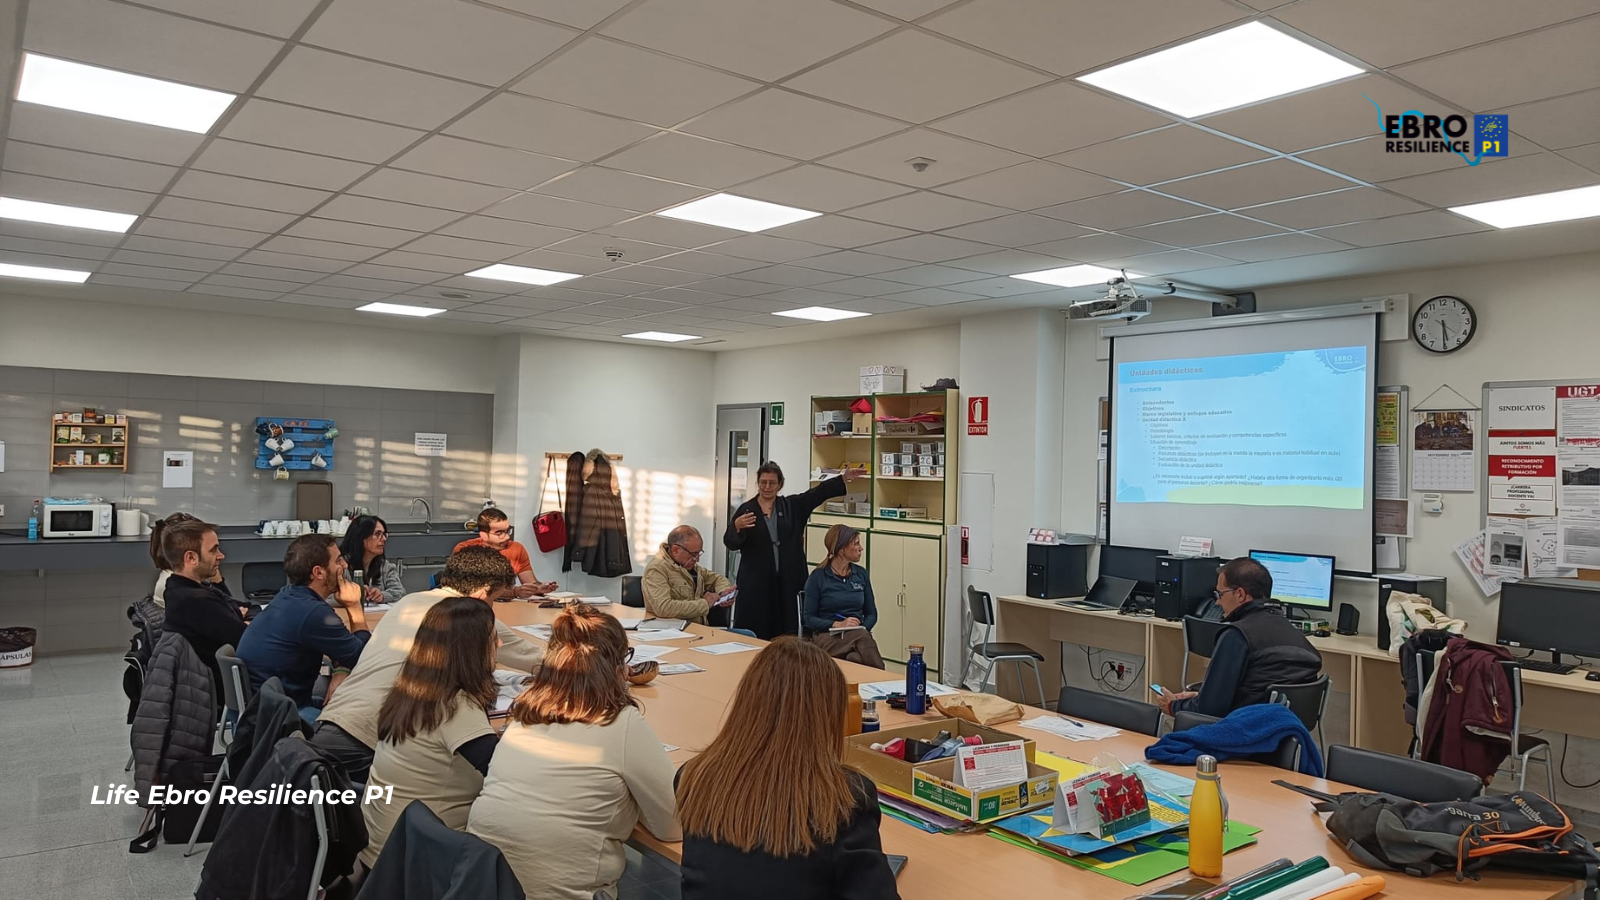 The LIFE Ebro Resilience Project works with the education sector in the intervention areas.